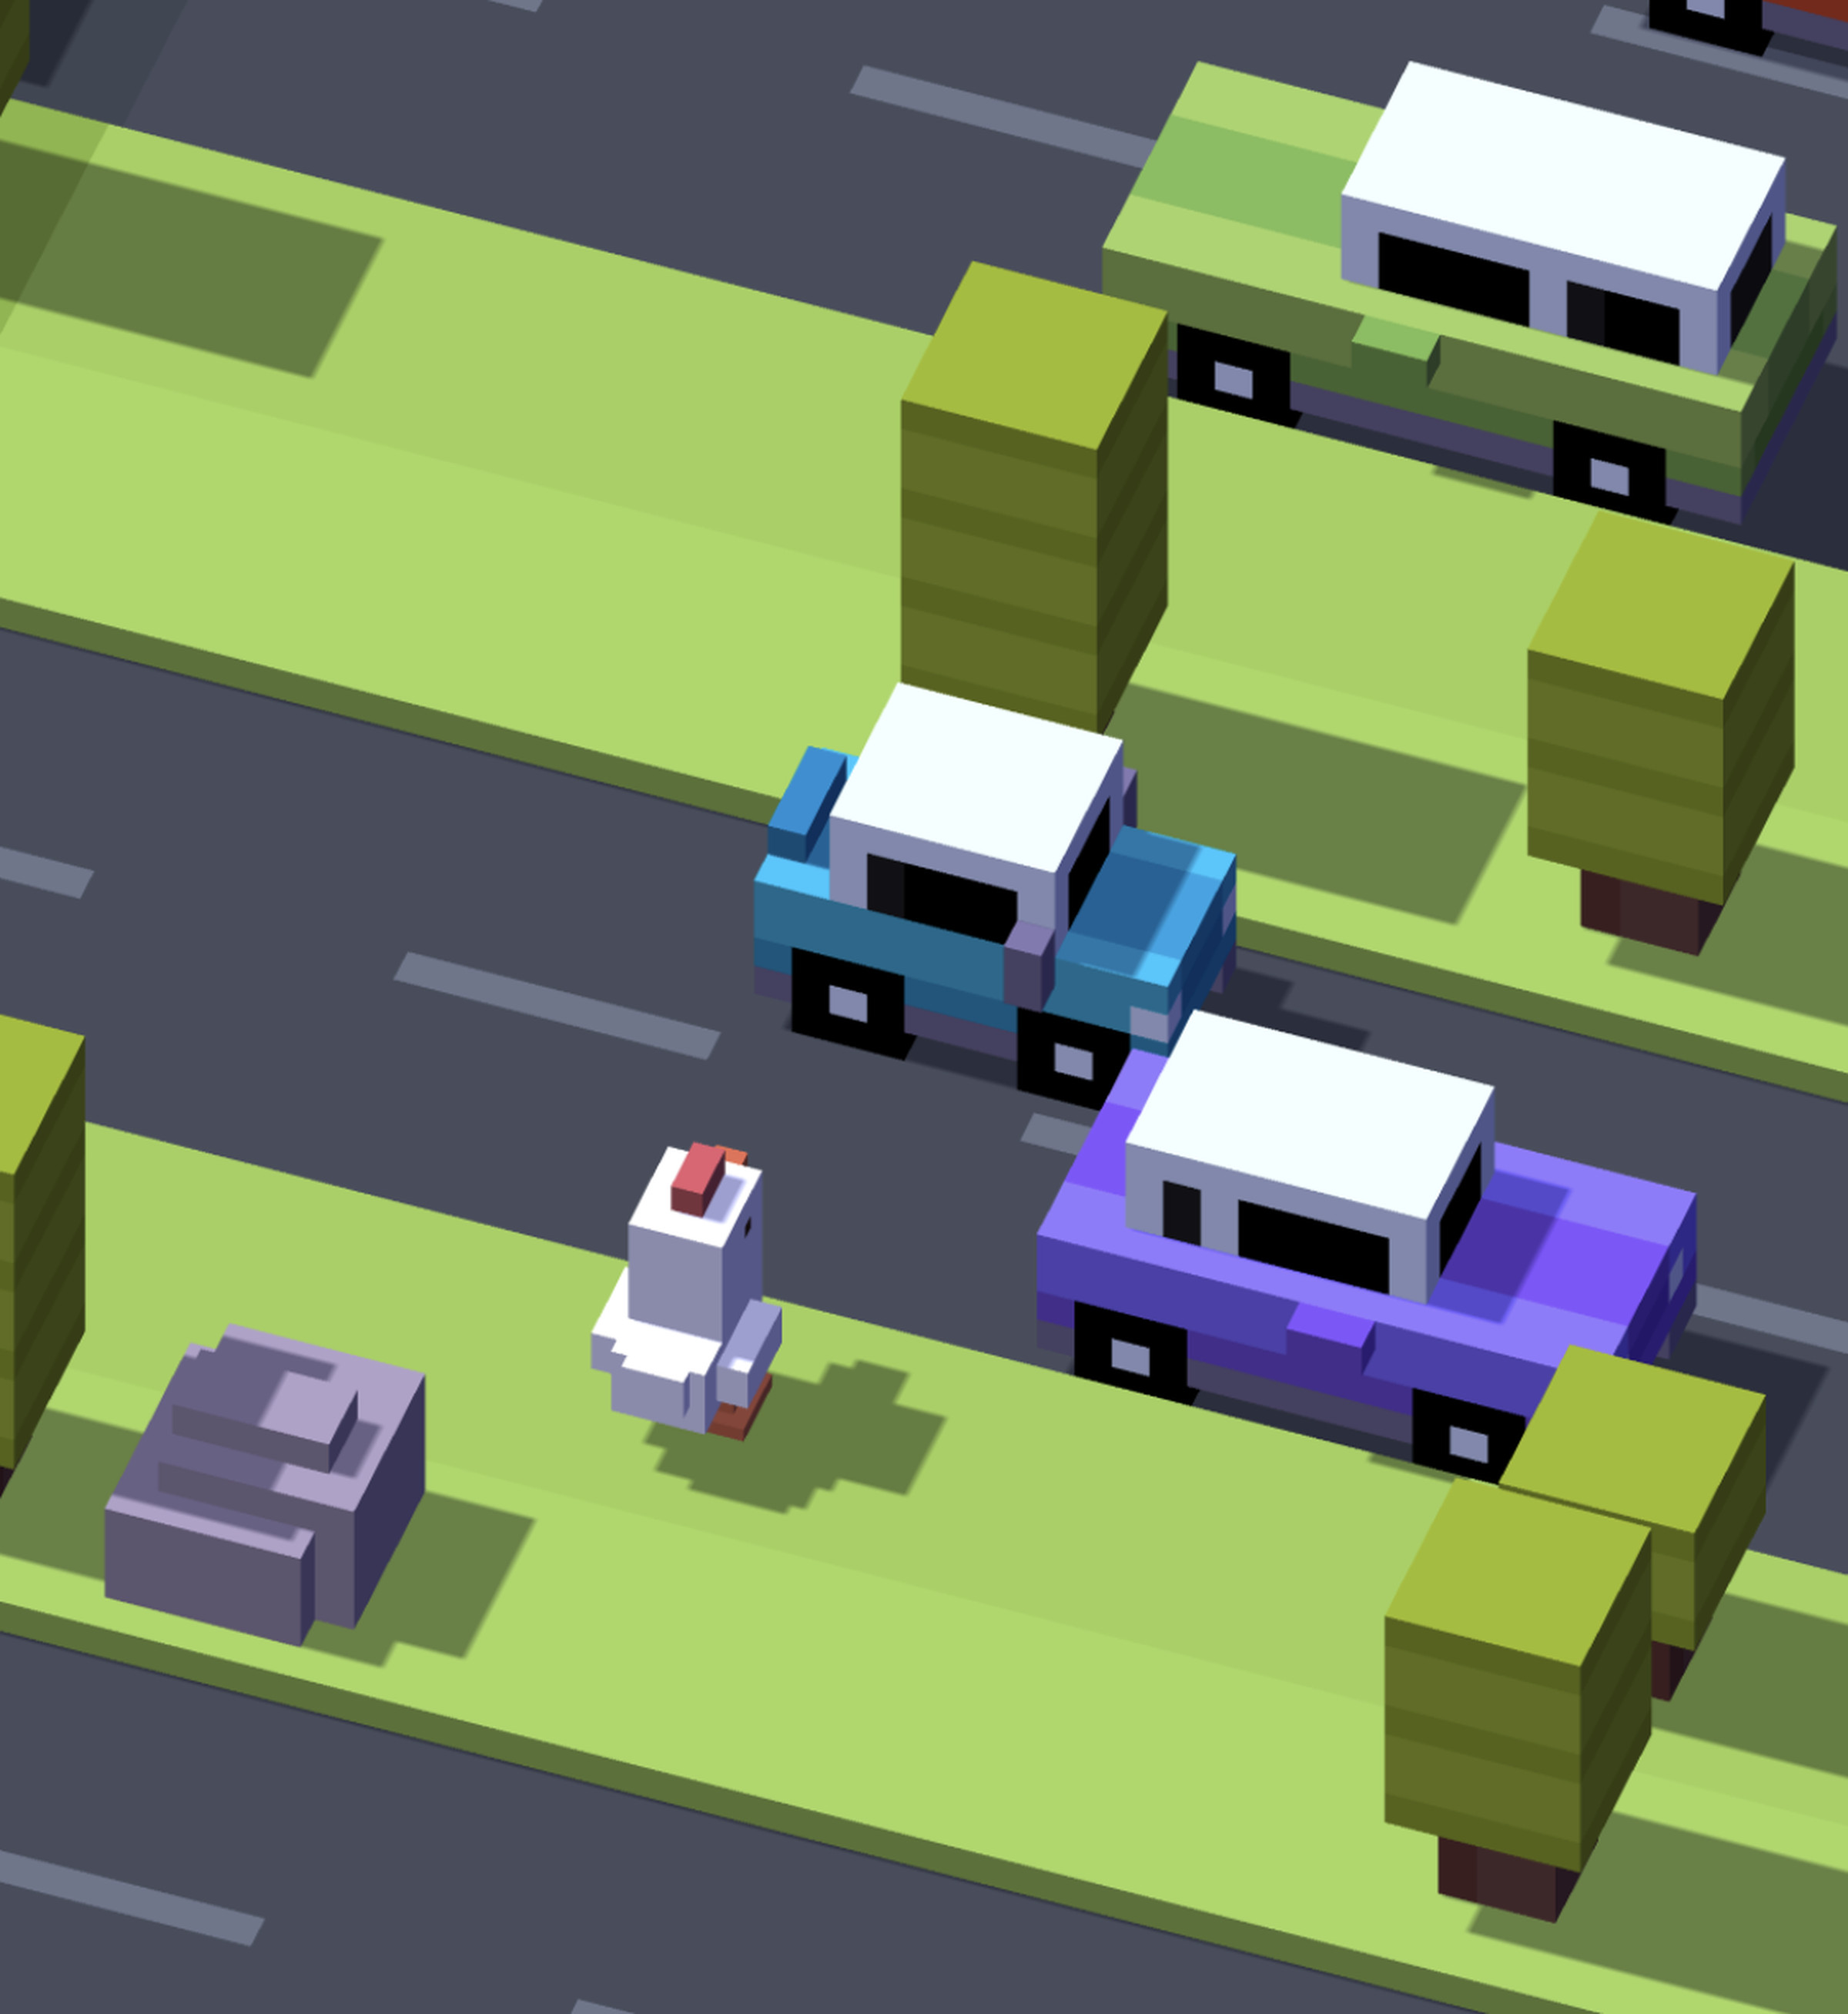 You’ll dodge many obstacles in Crossy Road Plus.